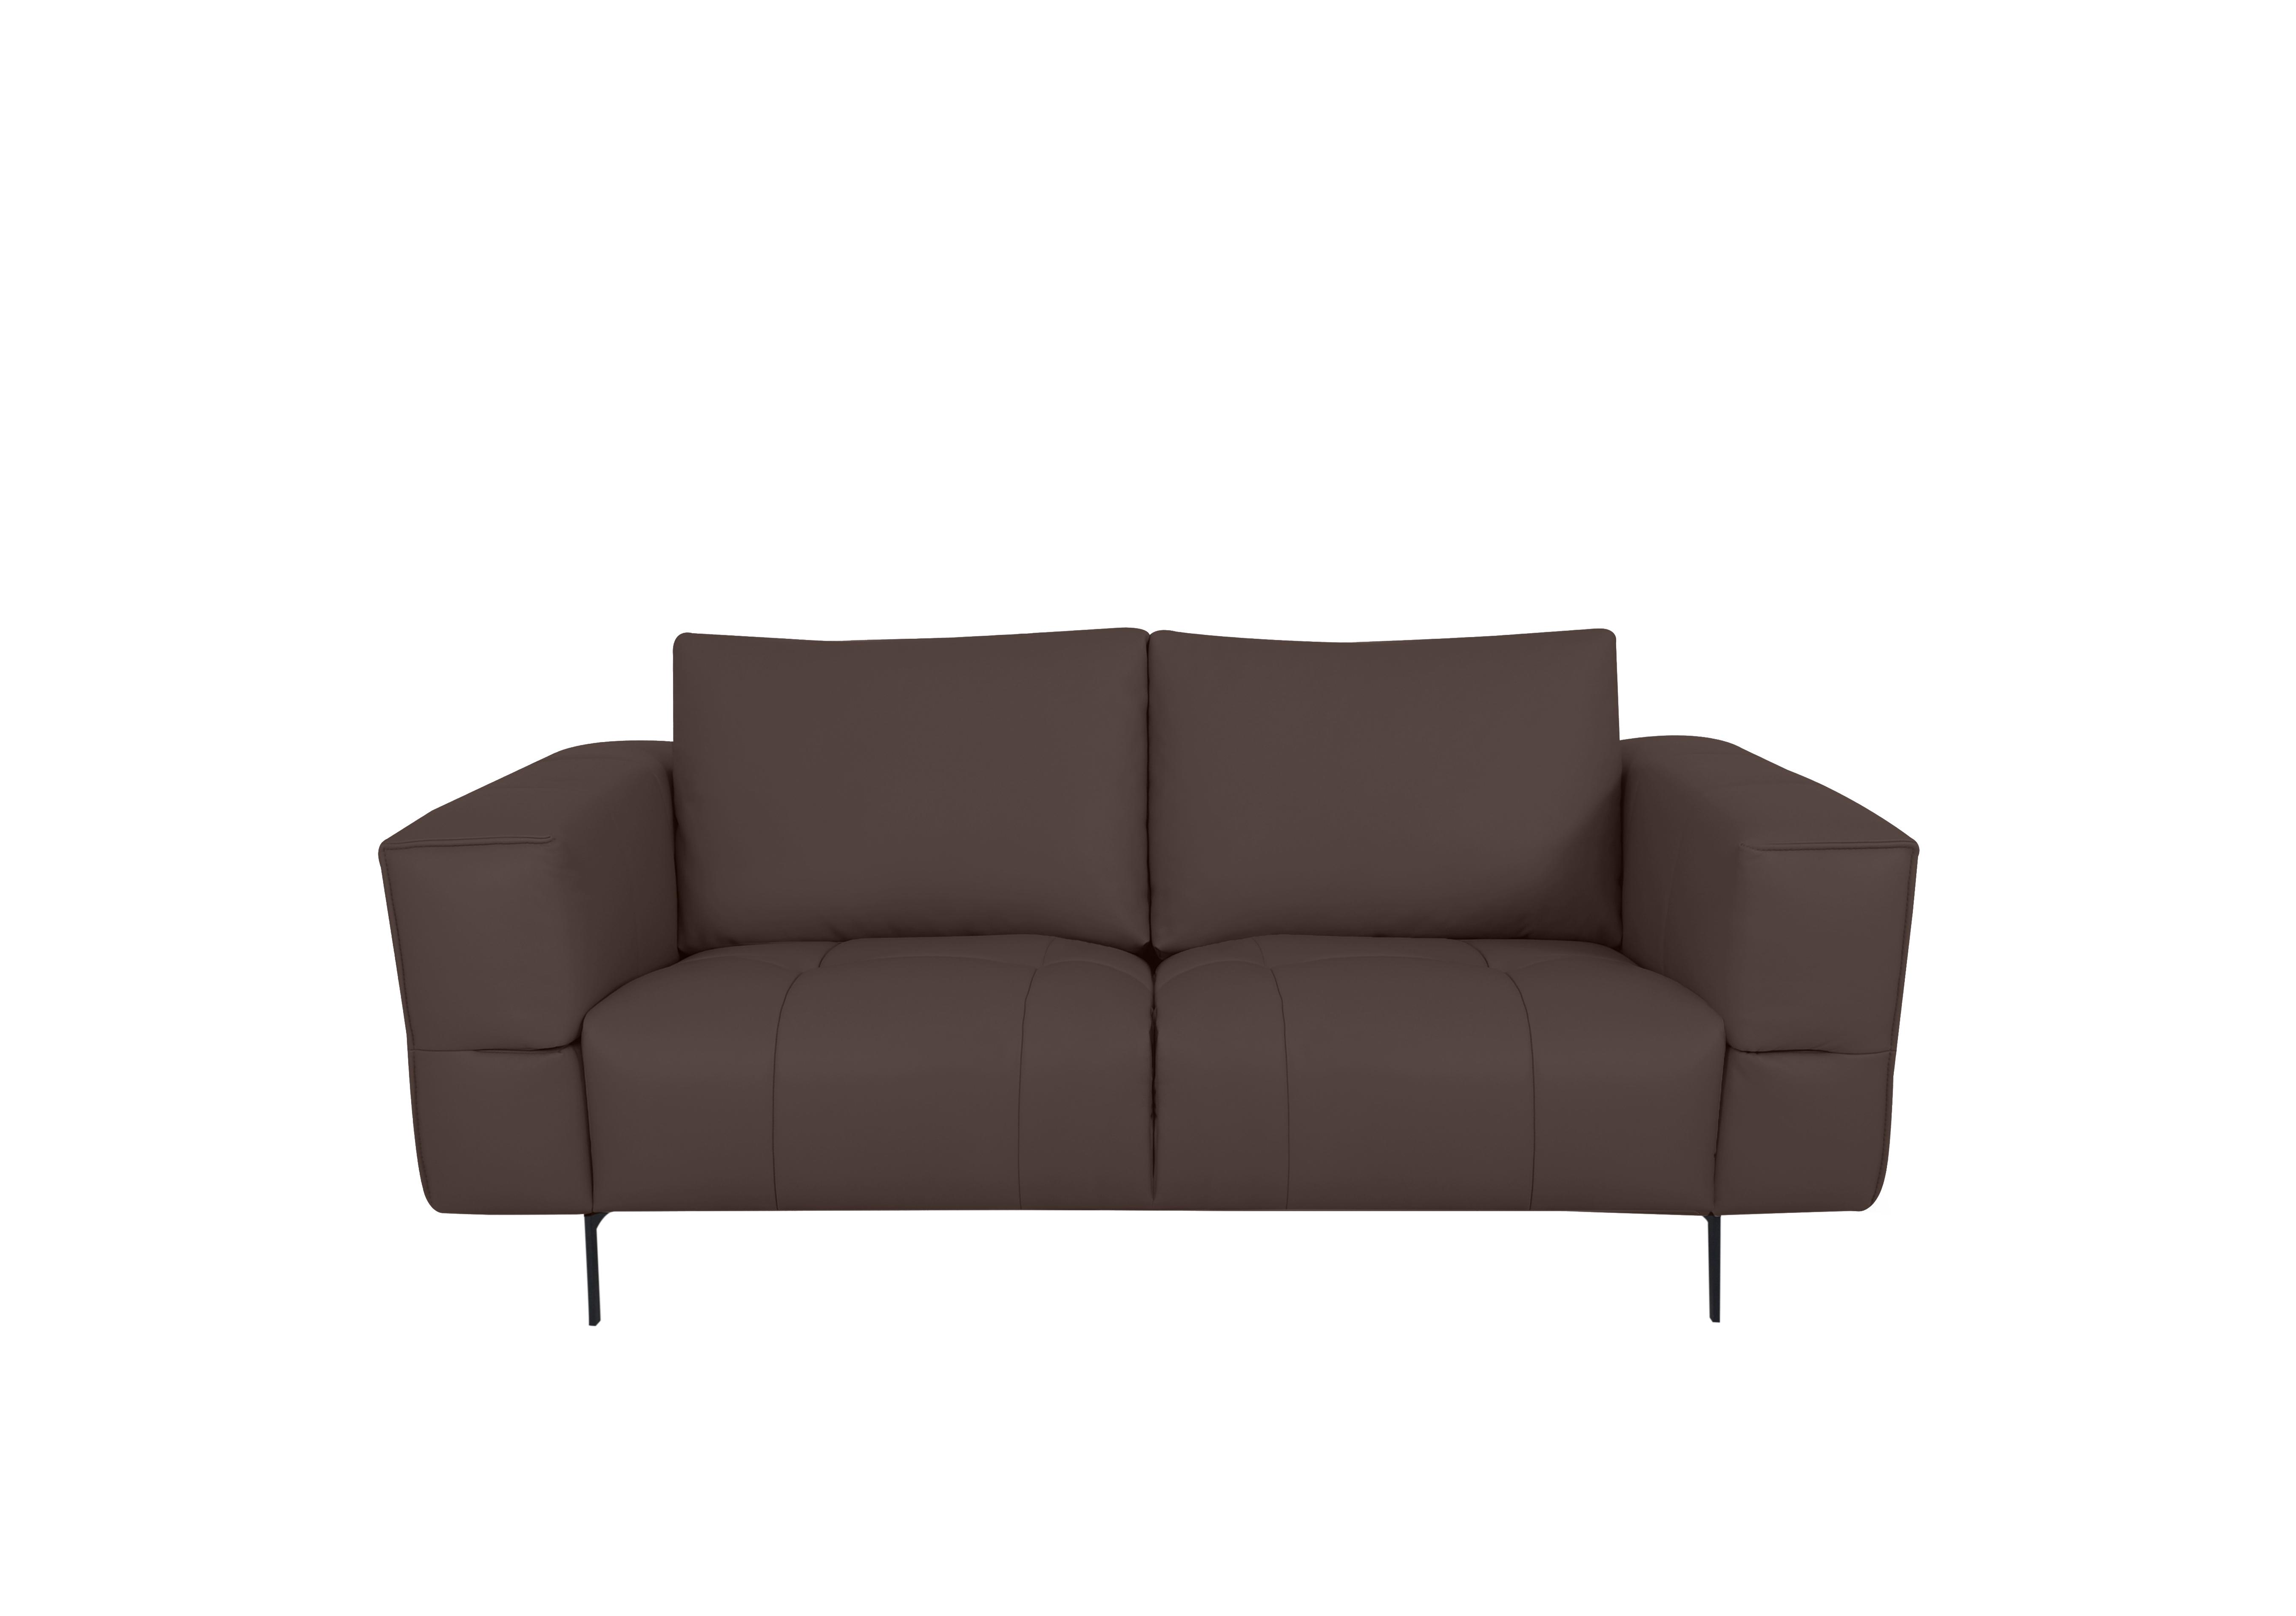 Lawson 2 Seater Leather Sofa in Nn-512e Cacao Brown on Furniture Village